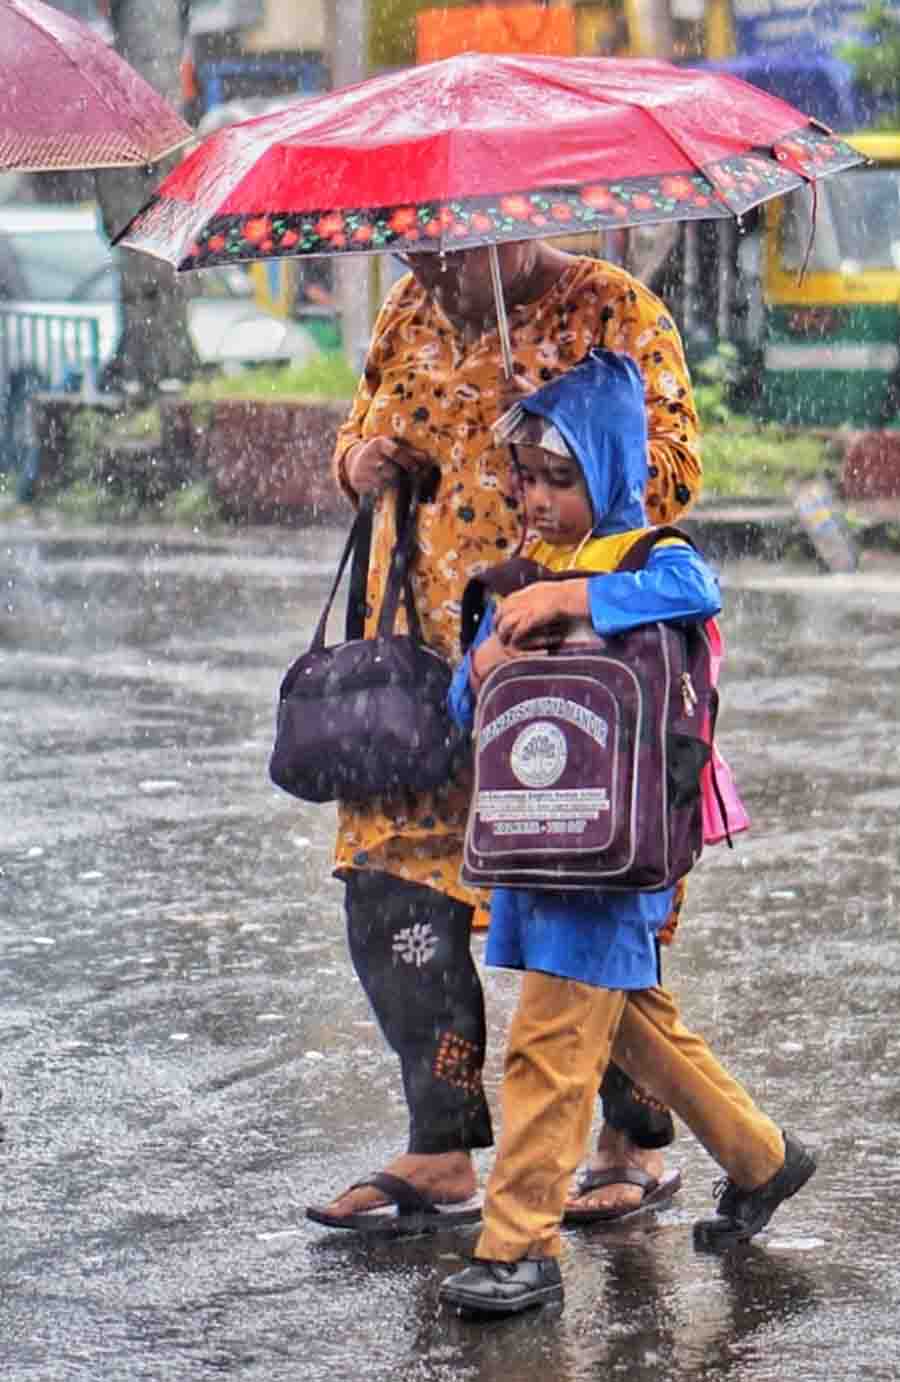 Several parts of the city received heavy rain since early Monday. Earlier, the IMD had predicted light/moderate fairly widespread to widespread rainfall/thunderstorm & lightning with isolated heavy rainfall activity over Gangetic West Bengal, Odisha and Andaman & Nicobar Islands between Sunday and Tuesday